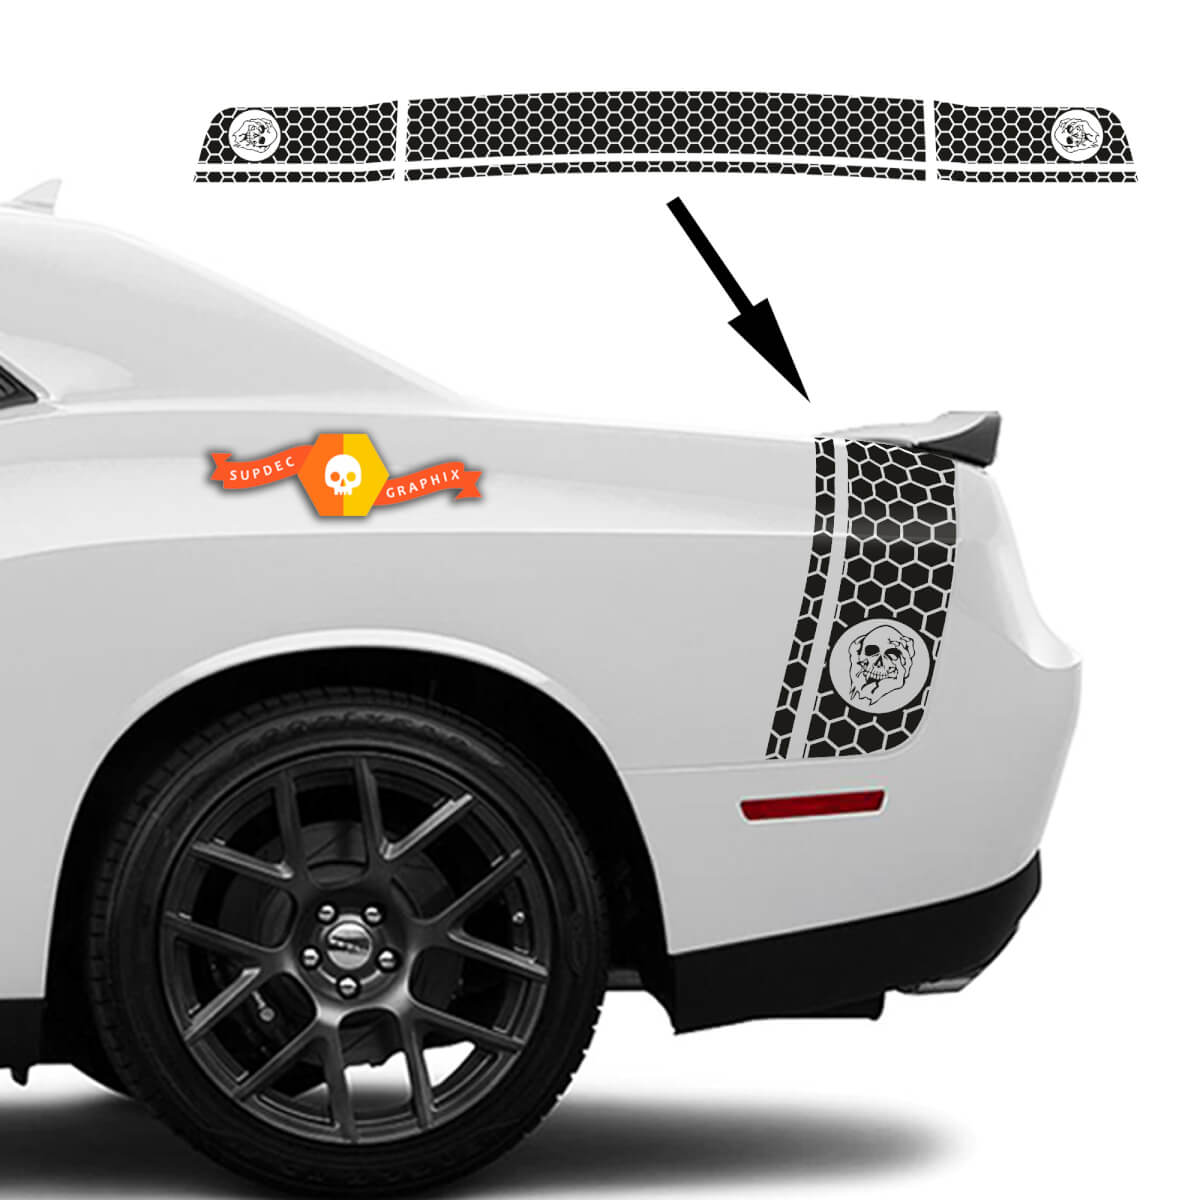 Dodge Challenger side and tail band Skull in Hand Honeycomb Decal Sticker graphics 